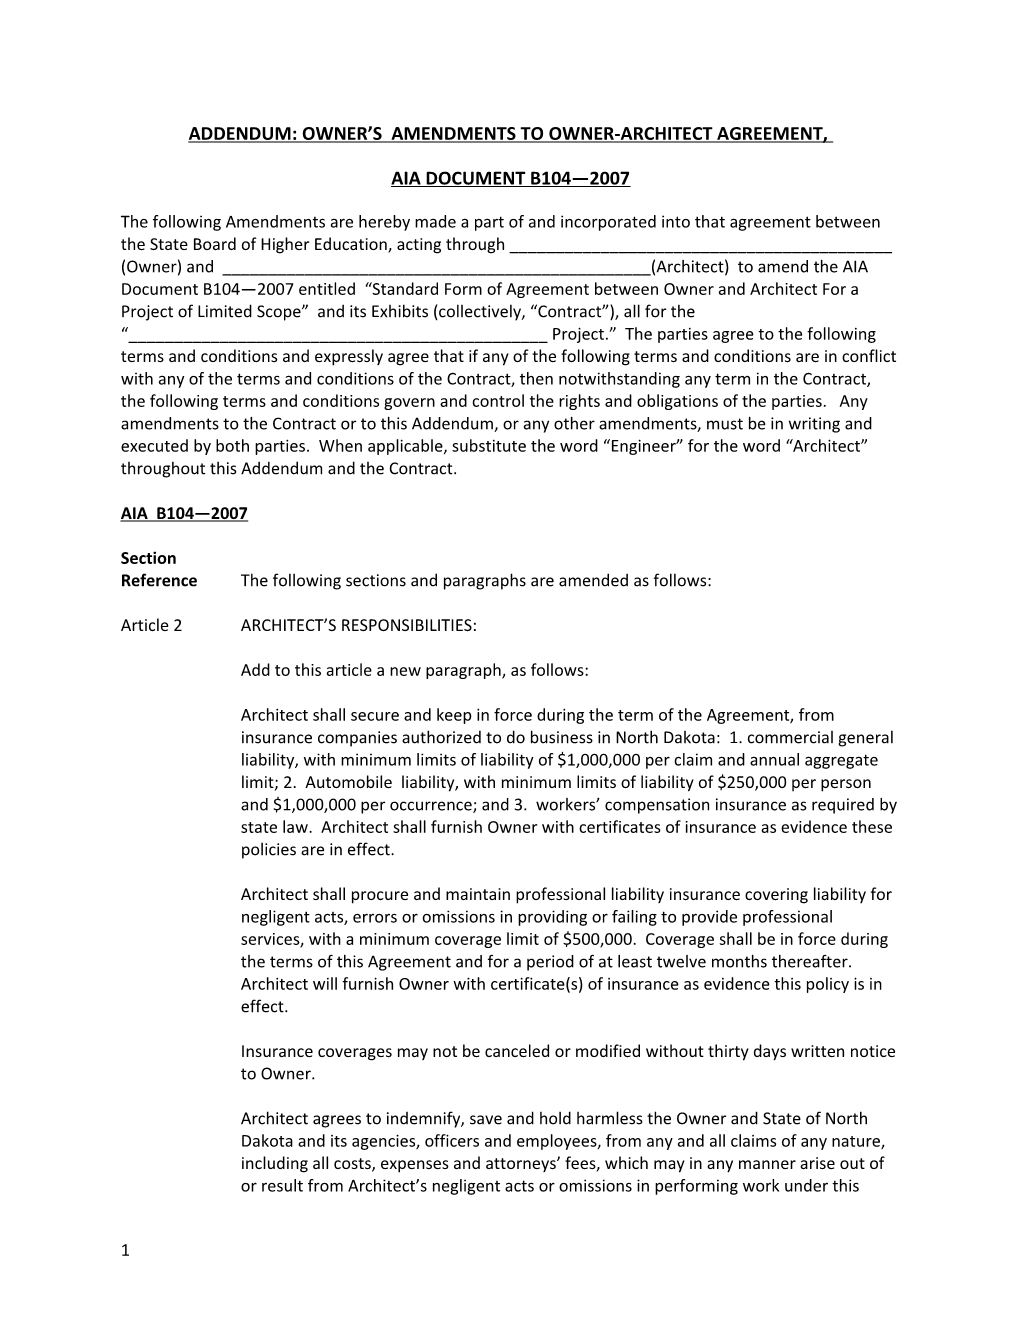 Addendum: Owner S Amendments to Owner-Architect Agreement s1